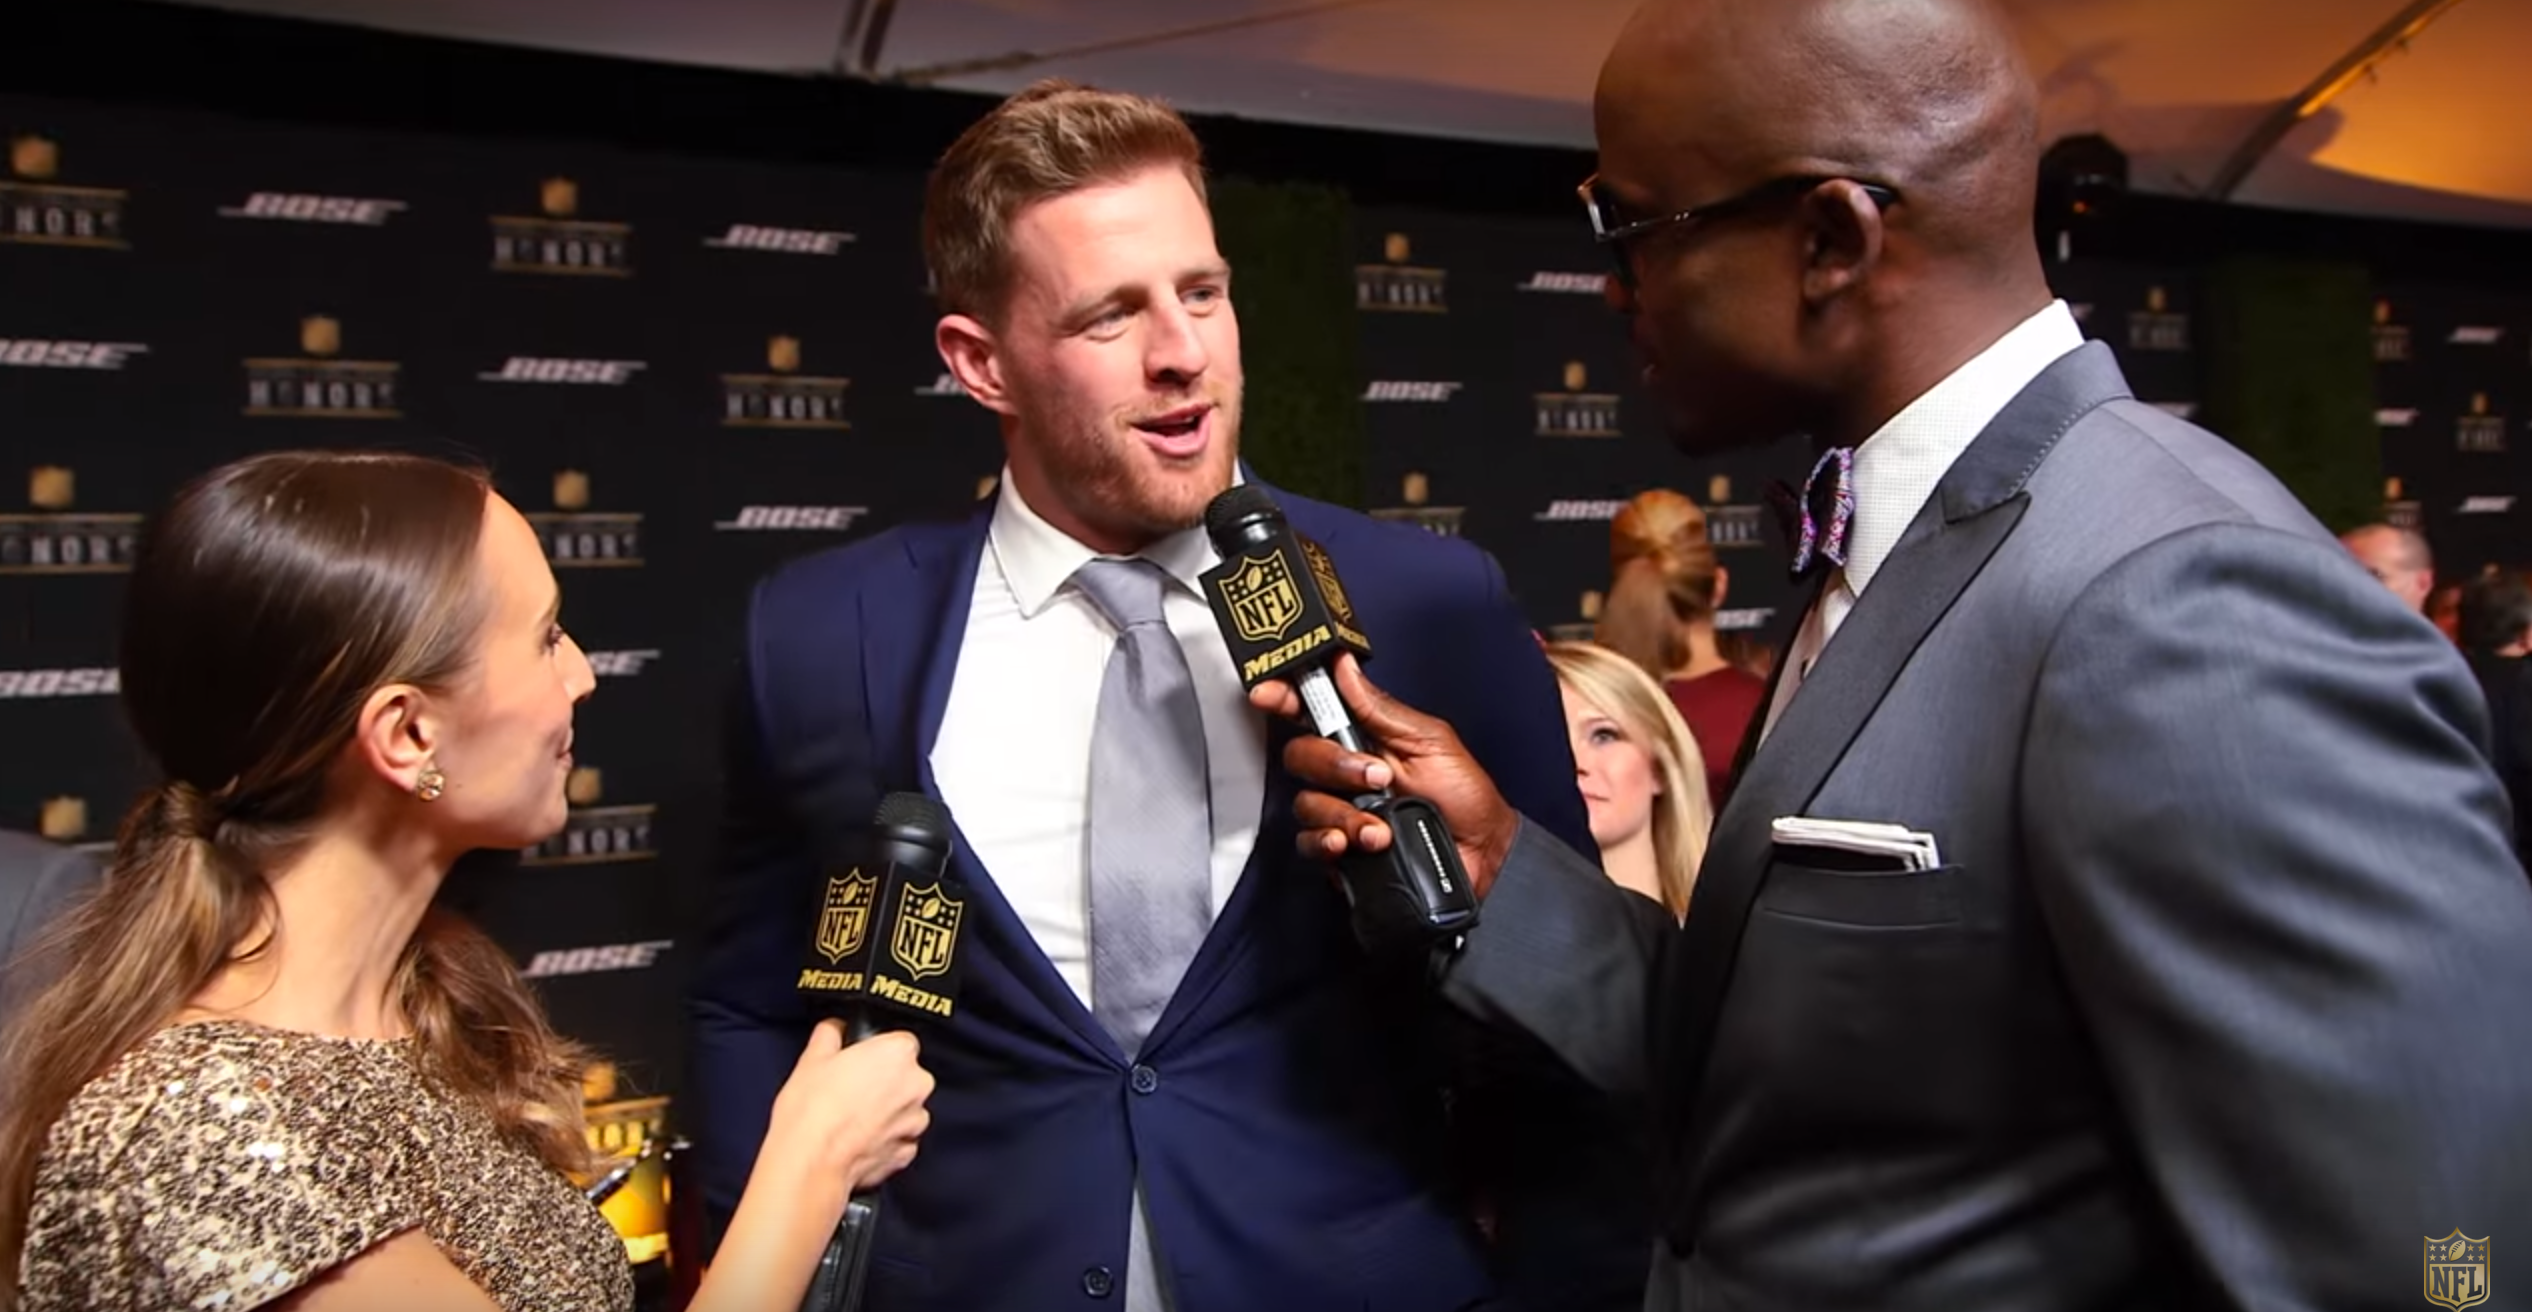 nfl honors, 2016 nfl honors, nfl fashion awards